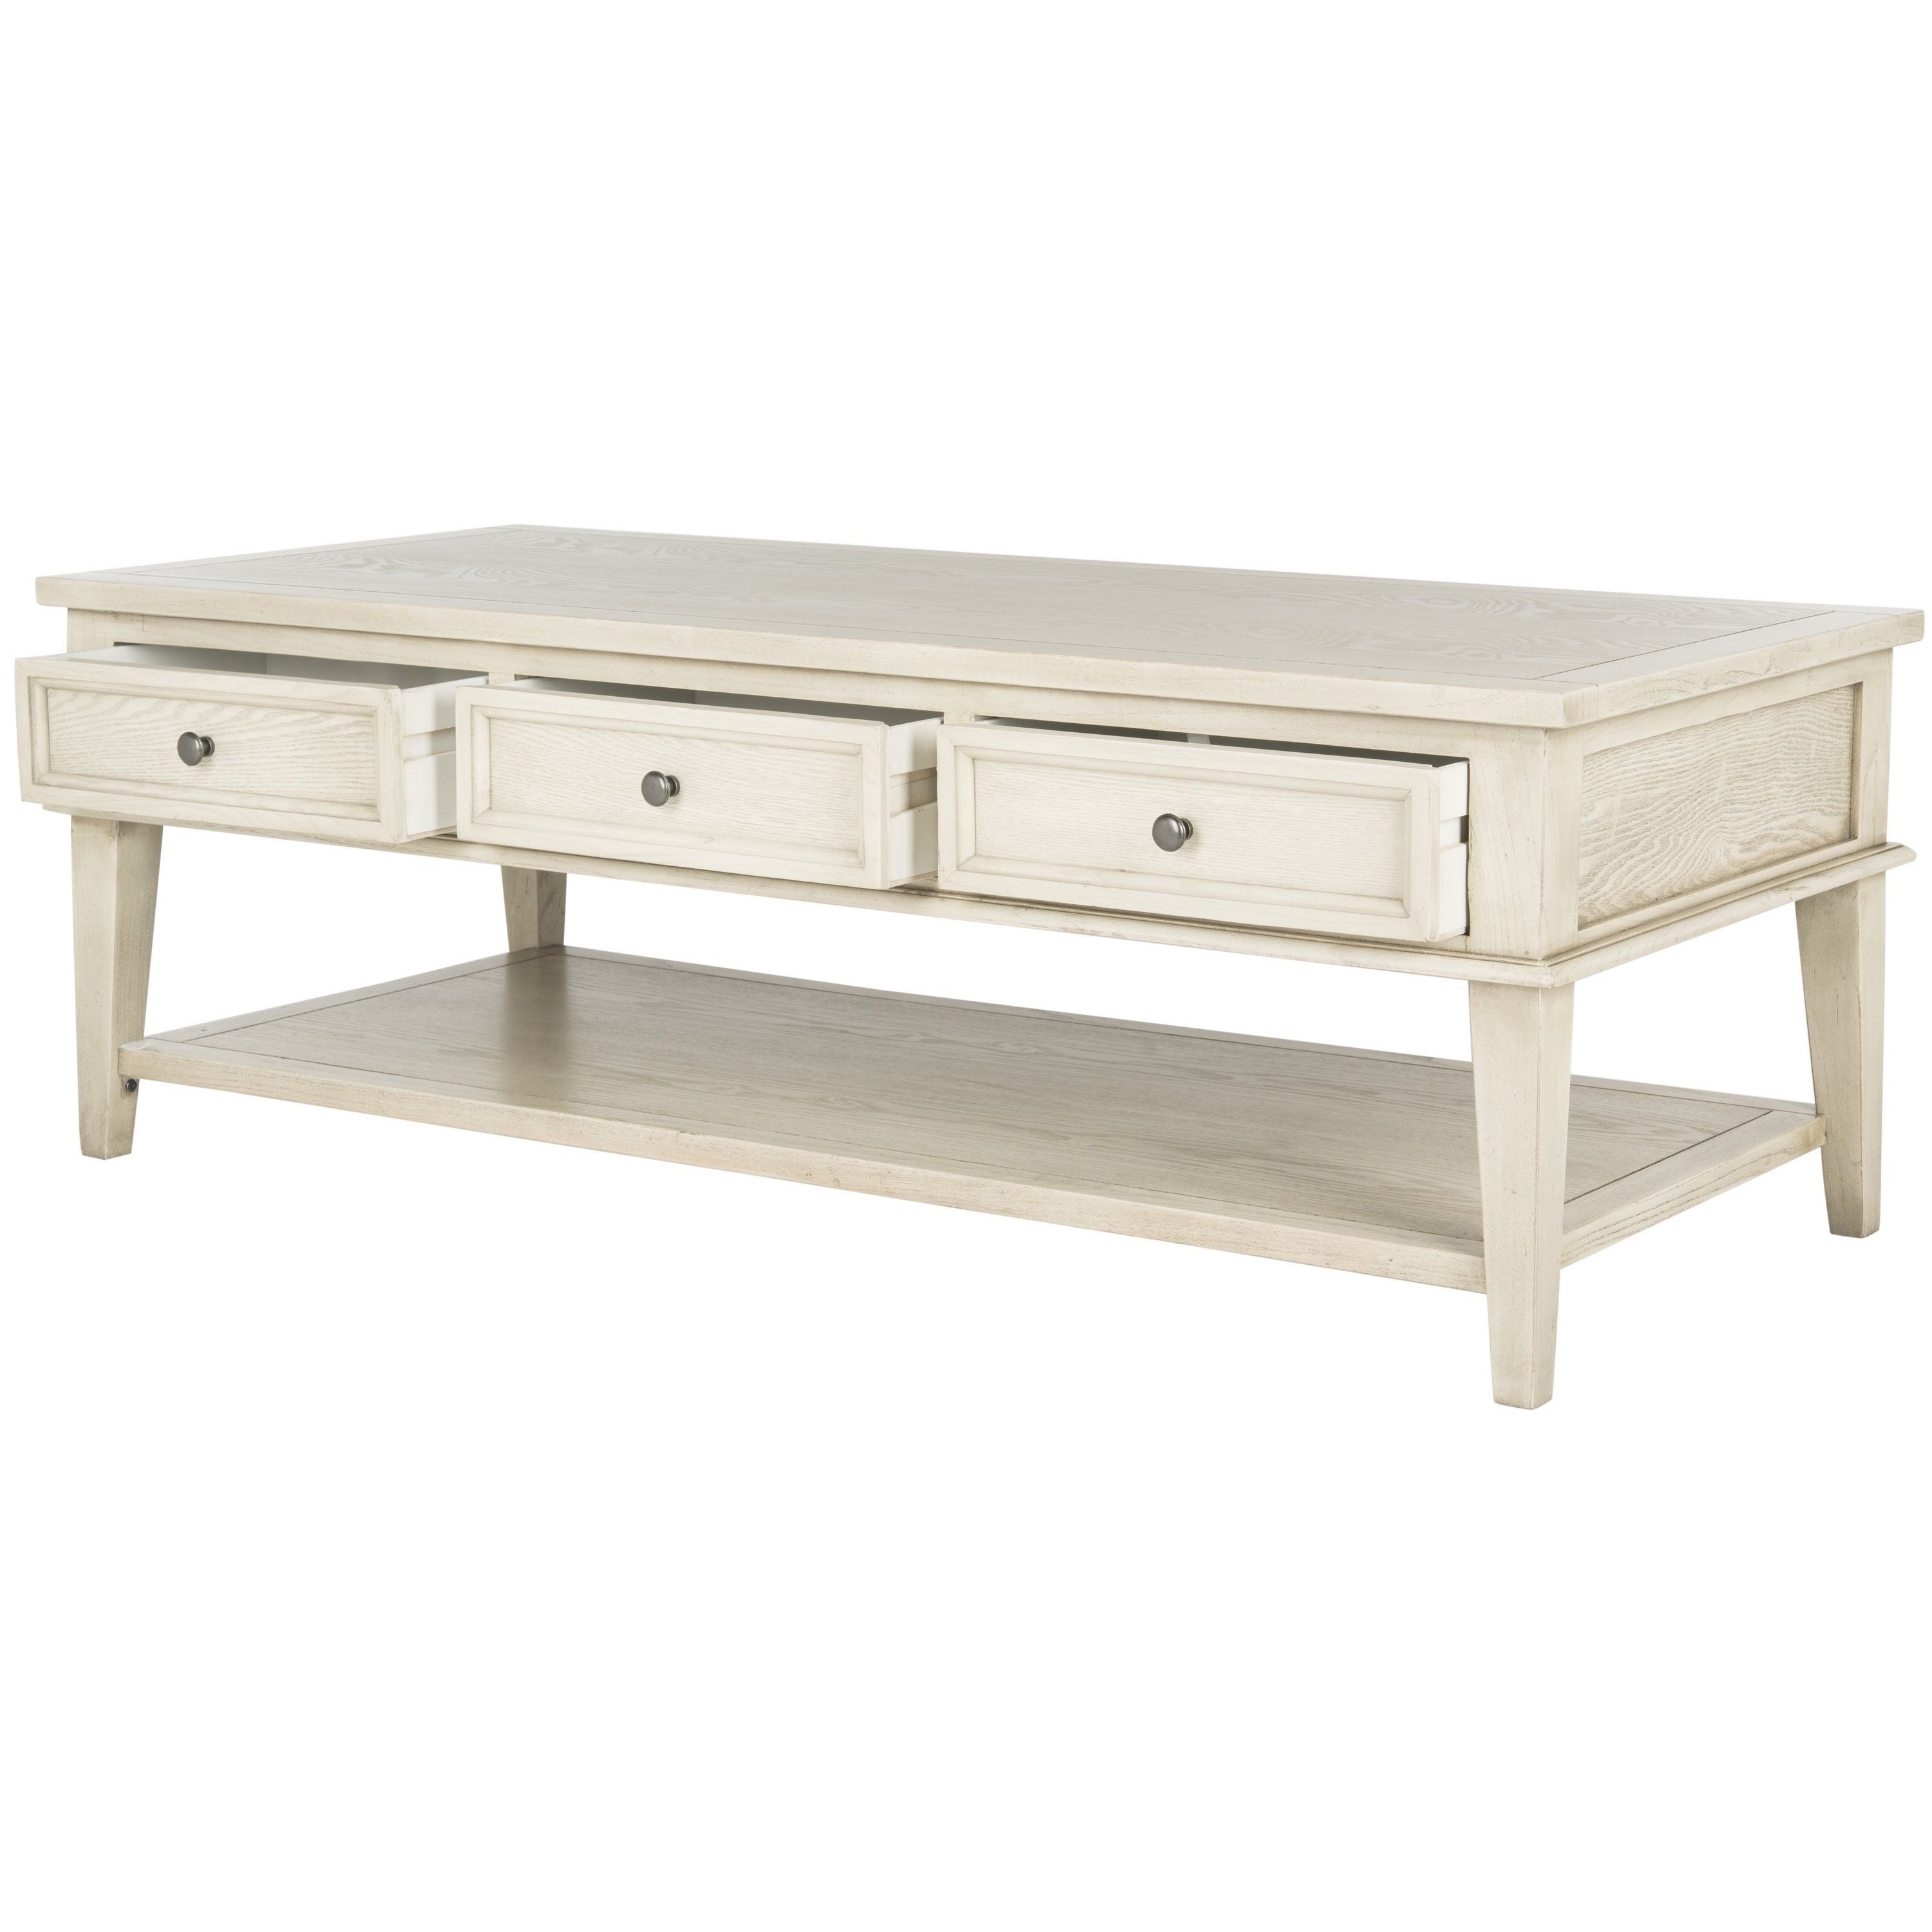 Candice Ii Lift Top Cocktail Tables Inside Favorite Shop Safavieh Manelin White Washed Coffee Table – On Sale – Free (View 6 of 20)